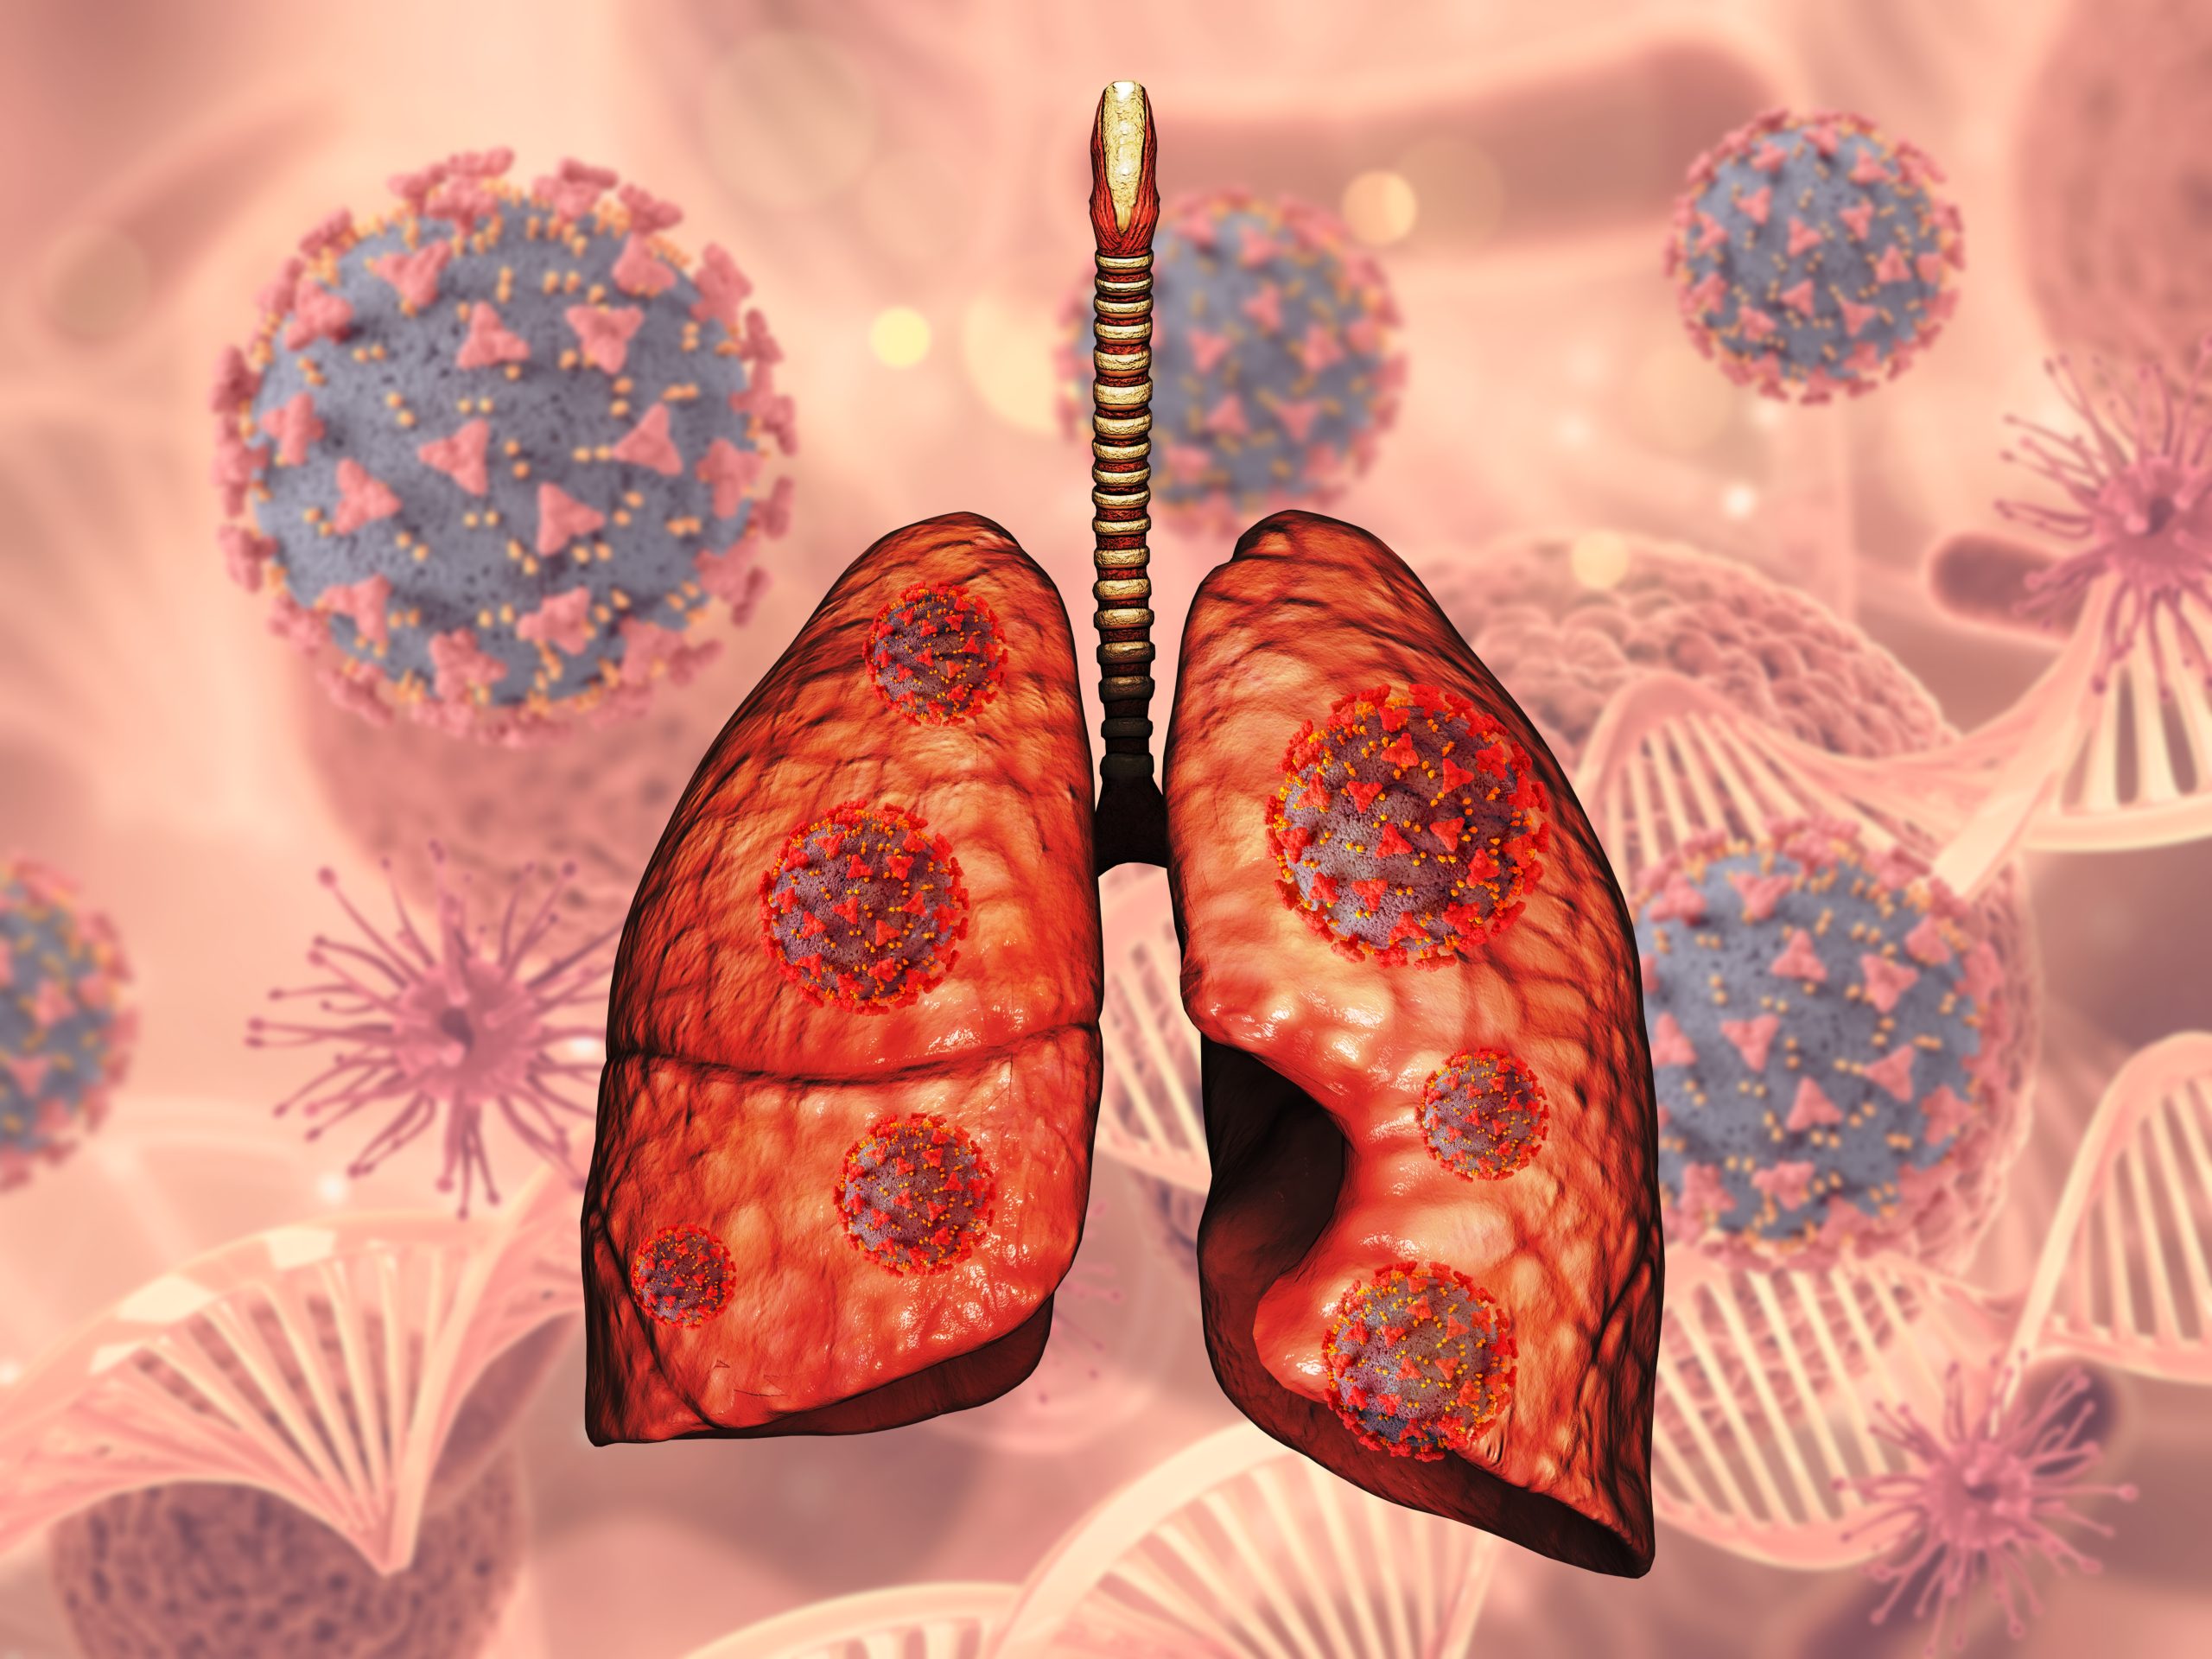 Early Detection and Diagnosis of Lung Cancer